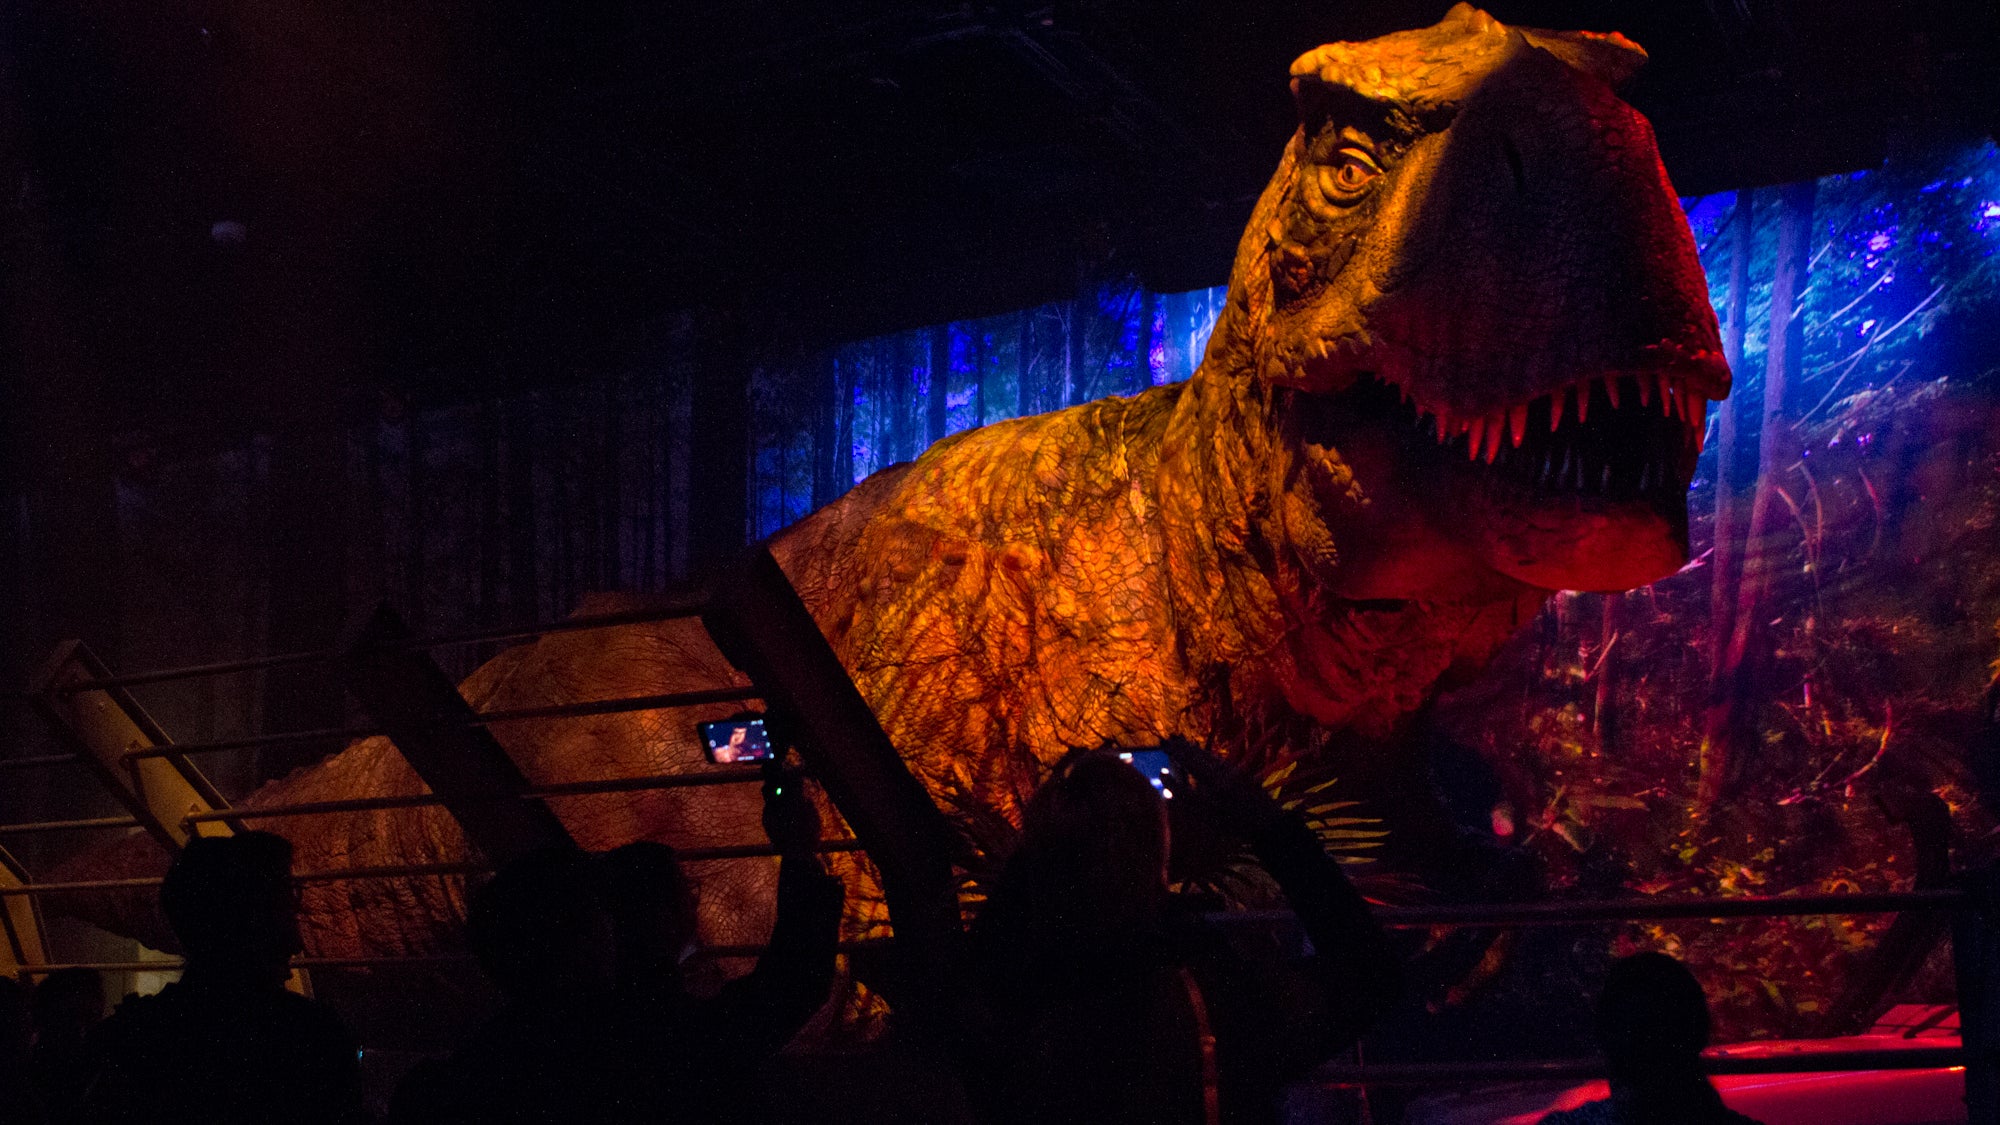 The Tyrannosaurus Rex emerges at the Jurassic World exhibit at the Franklin Institute. (Kimberly Paynter/WHYY)